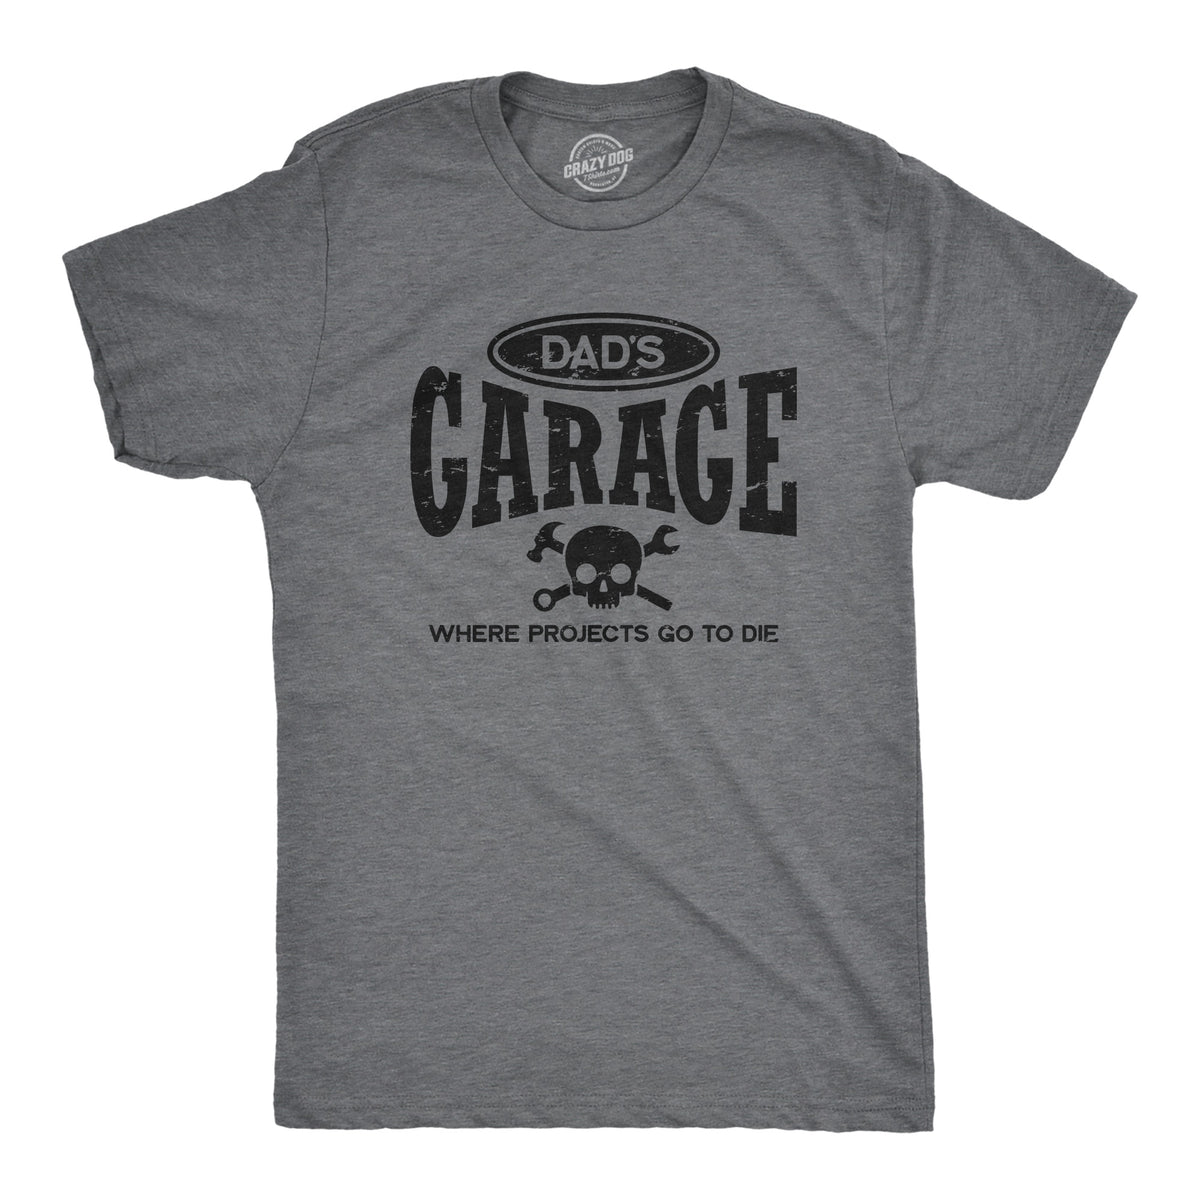 Funny Dark Heather Grey - GARAGE Dads Garage Where Projects Go To Die Mens T Shirt Nerdy Father&#39;s Day Sarcastic Tee